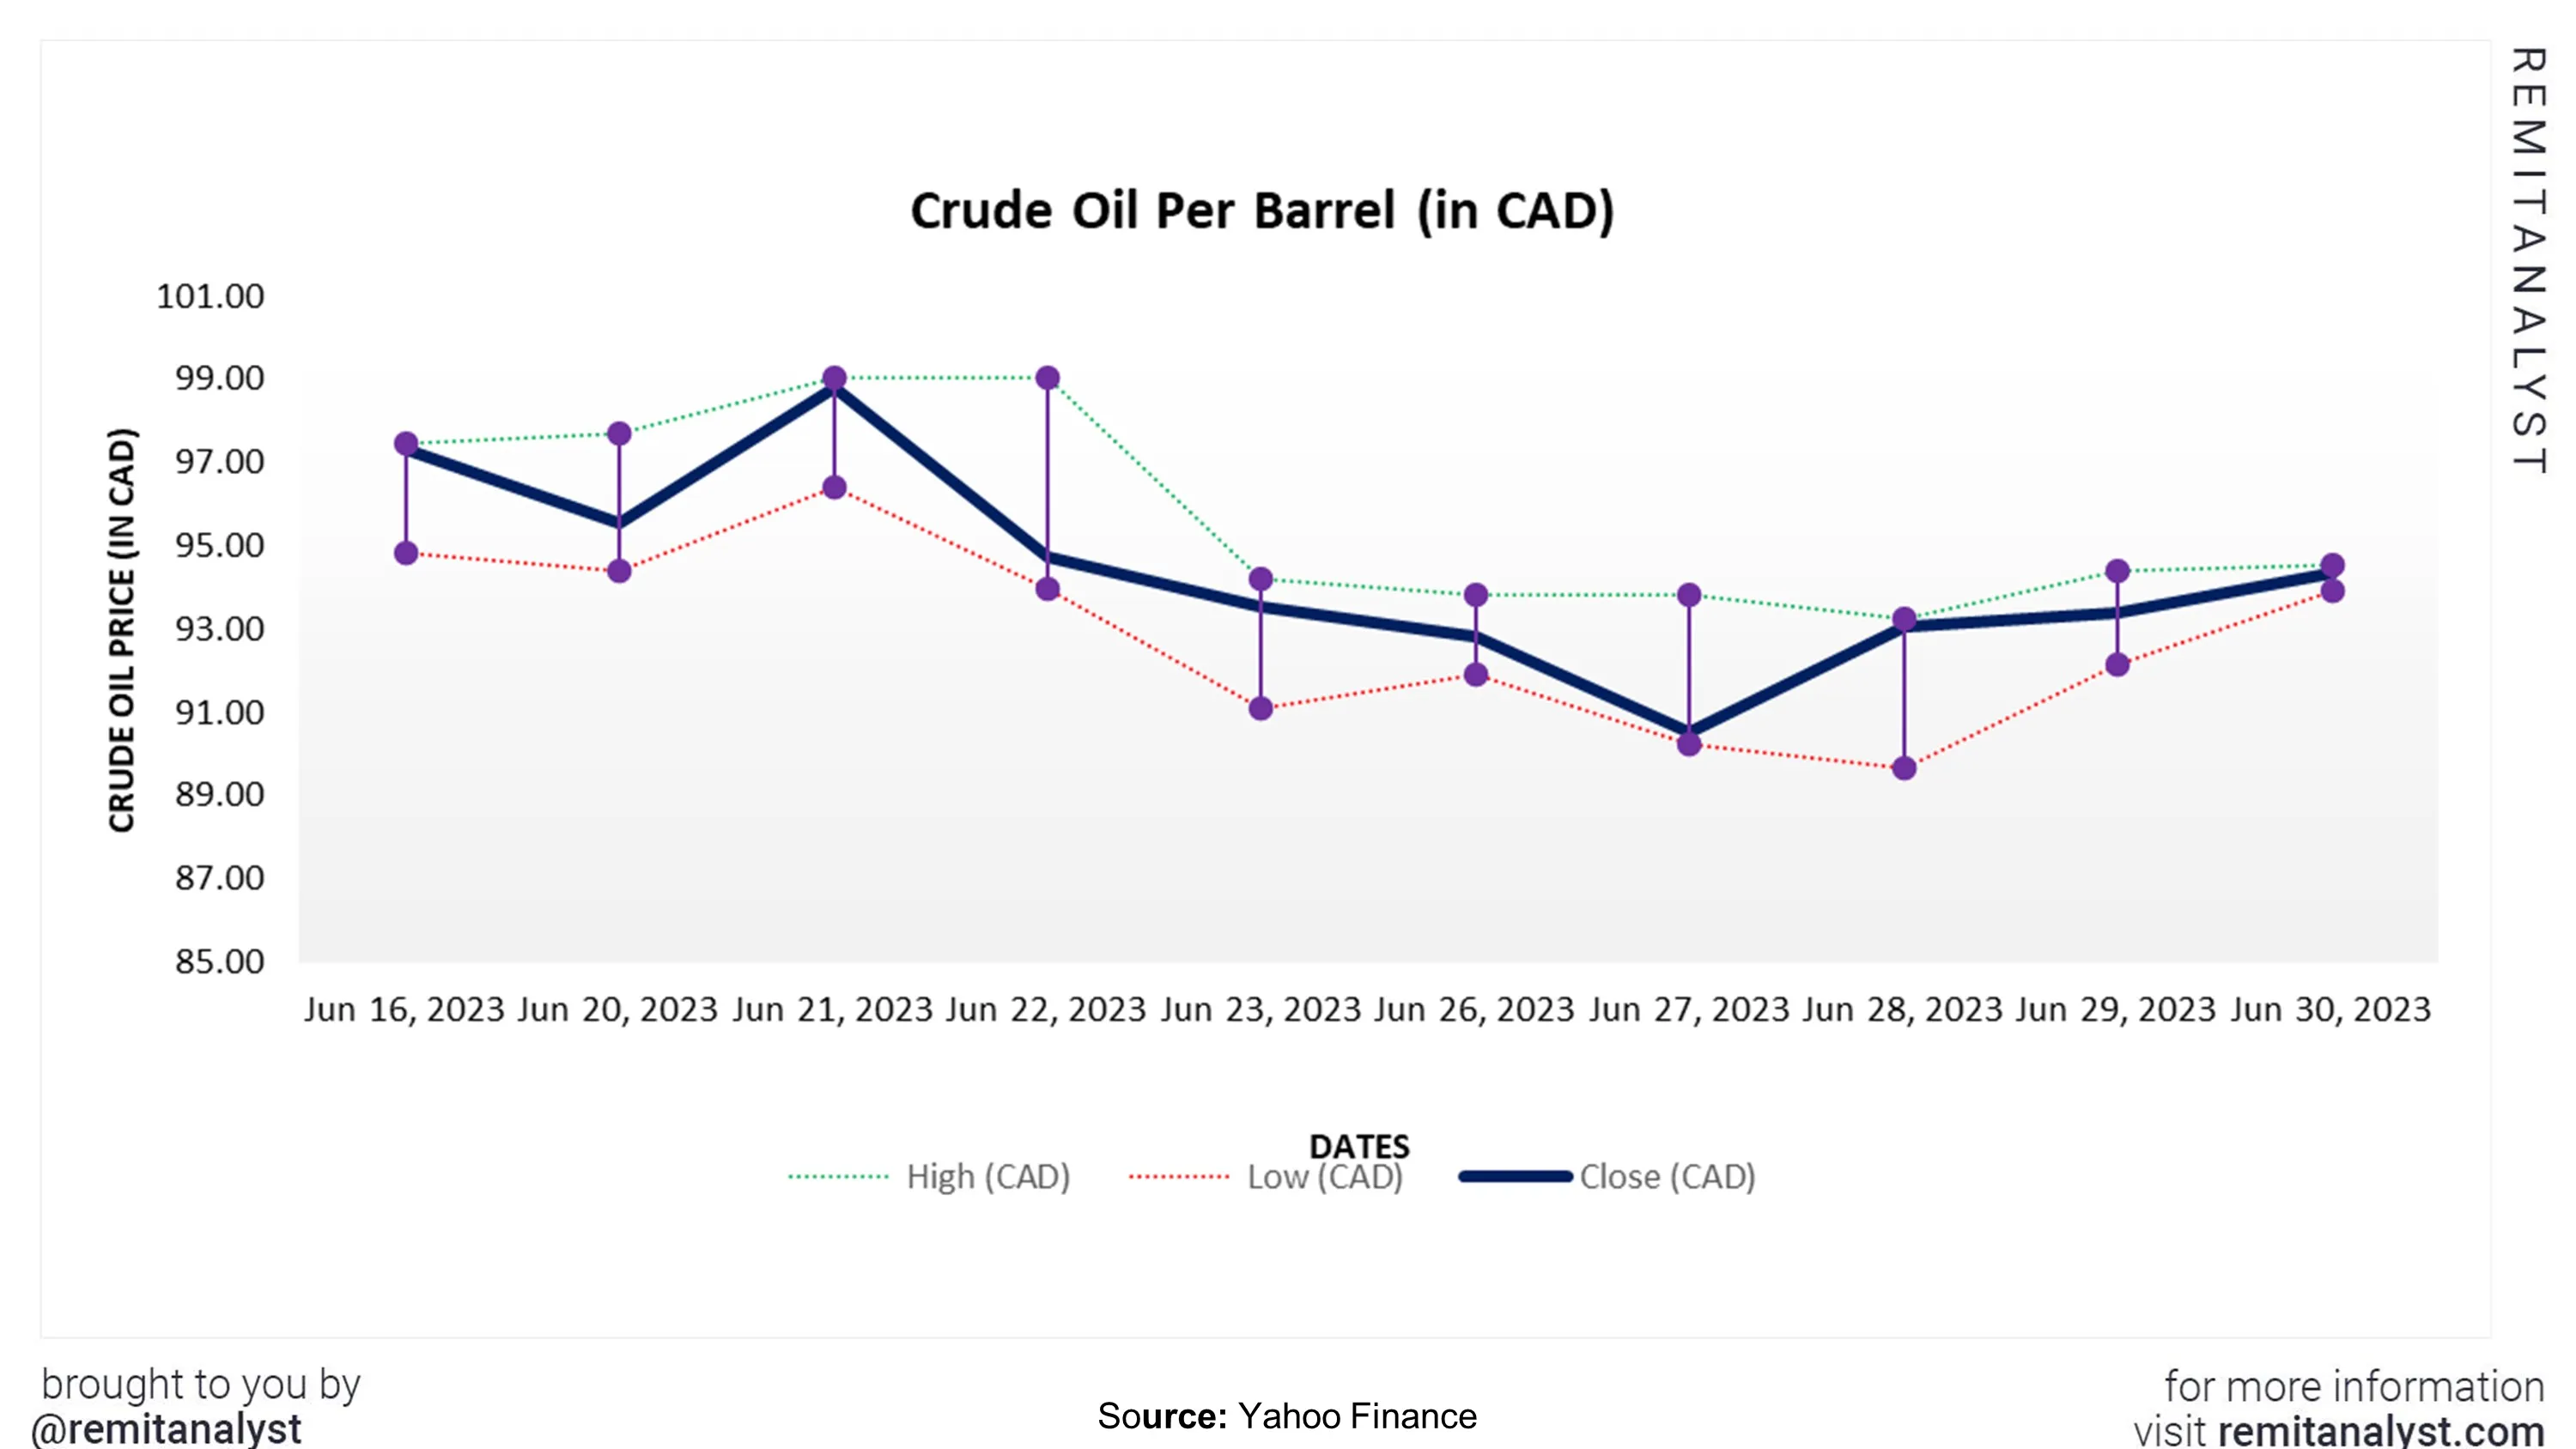 crude-oil-prices-canada-from-16-june-2023-to-30-june-2023